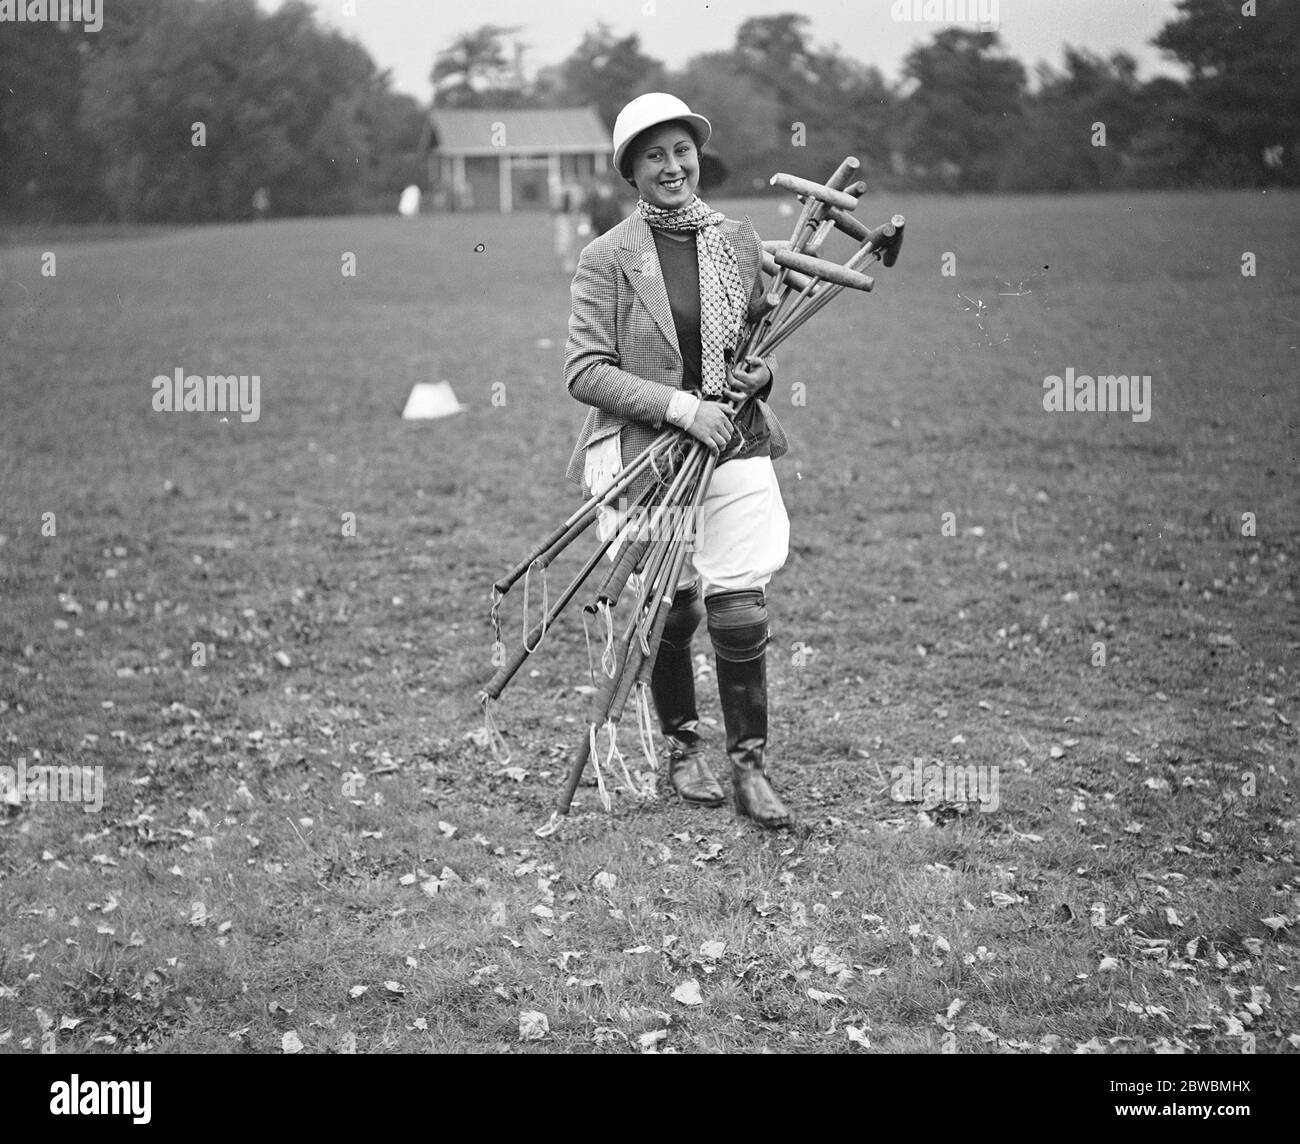 Ladies Polo at Ranelagh . Southdown Ladies versus the National School of Equitation . Miss D'Arcy Defries , Captain of the Southdown Ladies team collects the polo sticks . 1933 Stock Photo